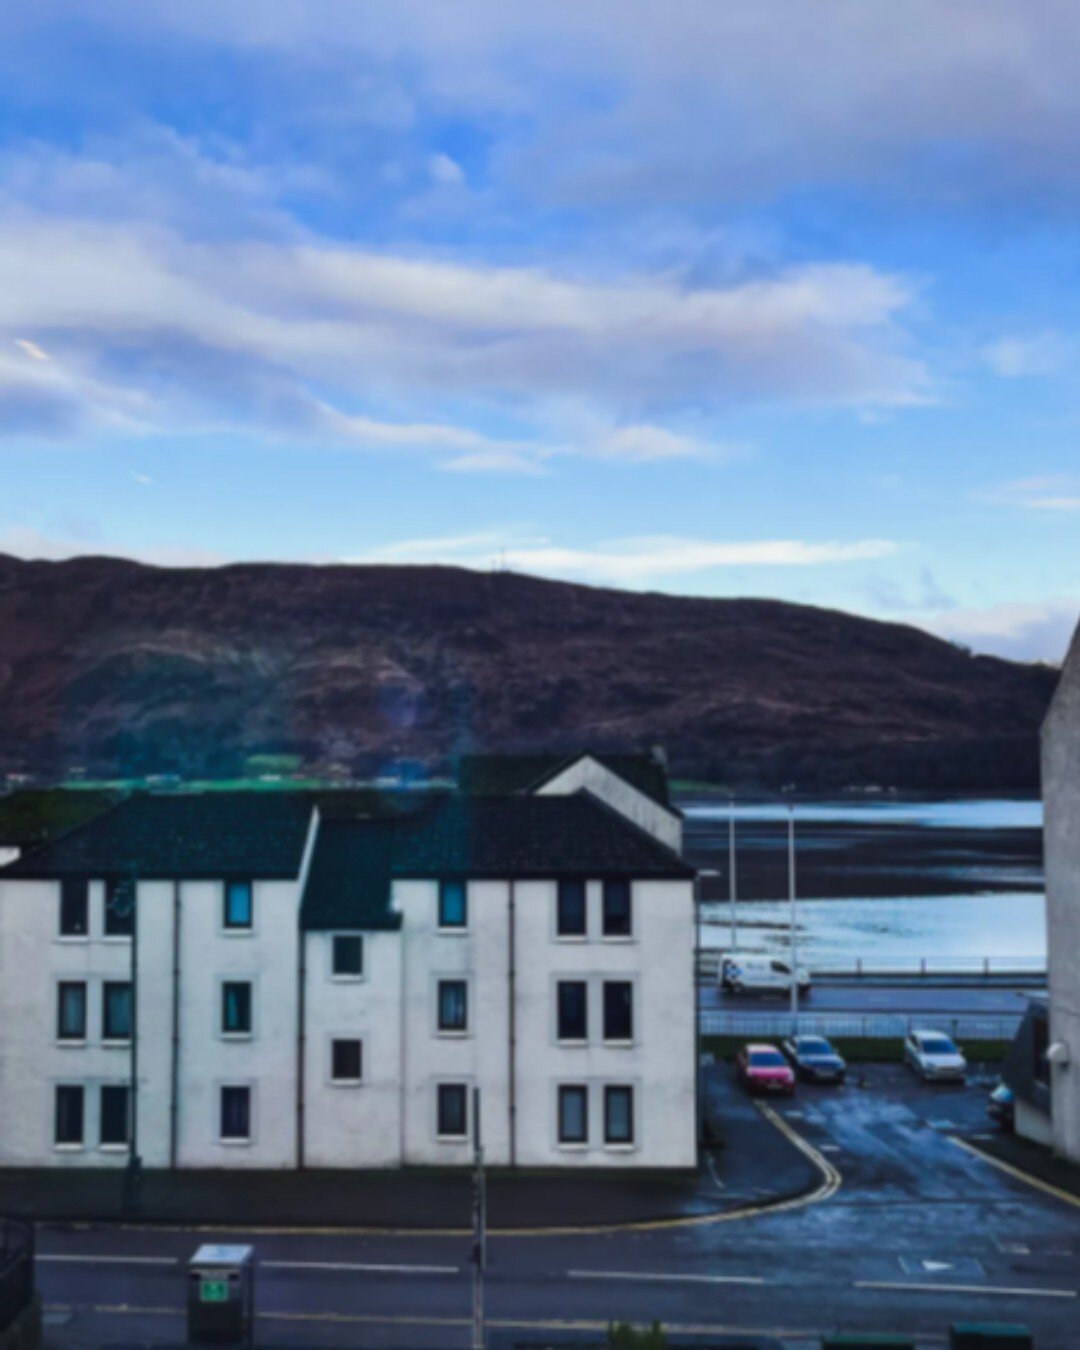 &quot;Fort William: the perfect base for an adventure in the Scottish Highlands&quot;

@theglobefromglasgow recently came to stay with us on her visit to Fort William. Here's what she had to say...

&quot;We stayed in The Garrison on Fort William&rsq